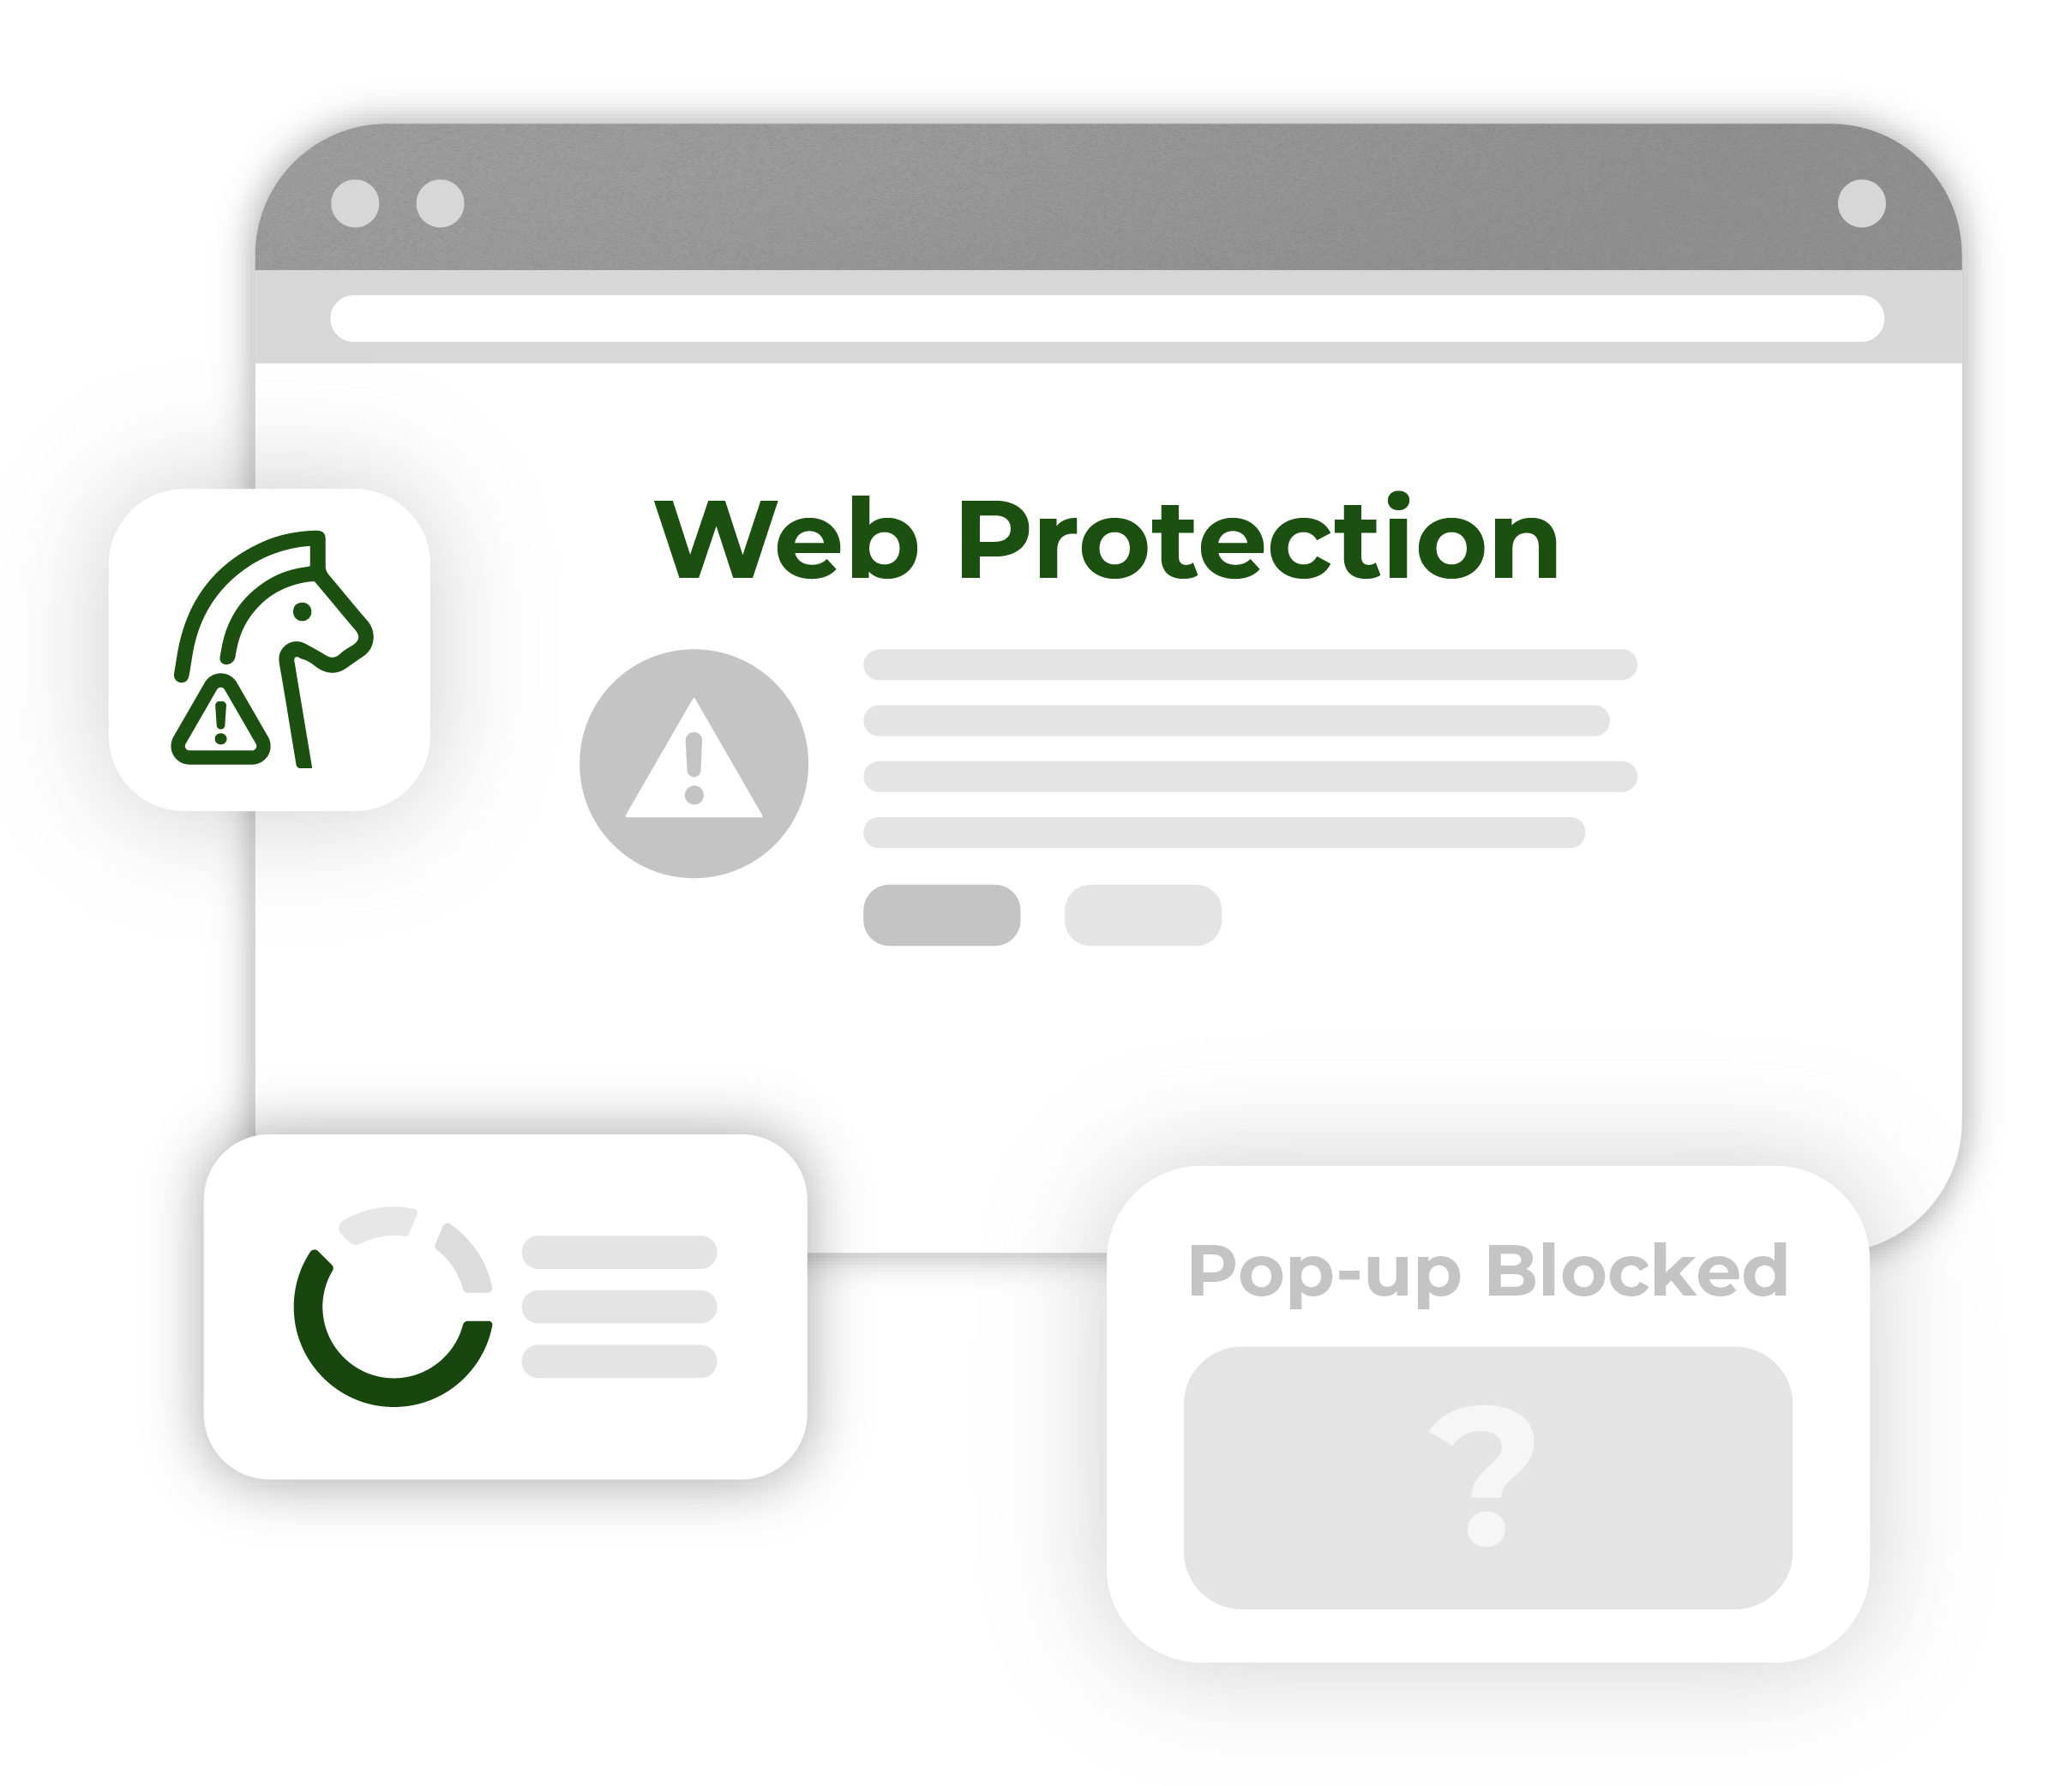 A user interface mockup for an web protection system.